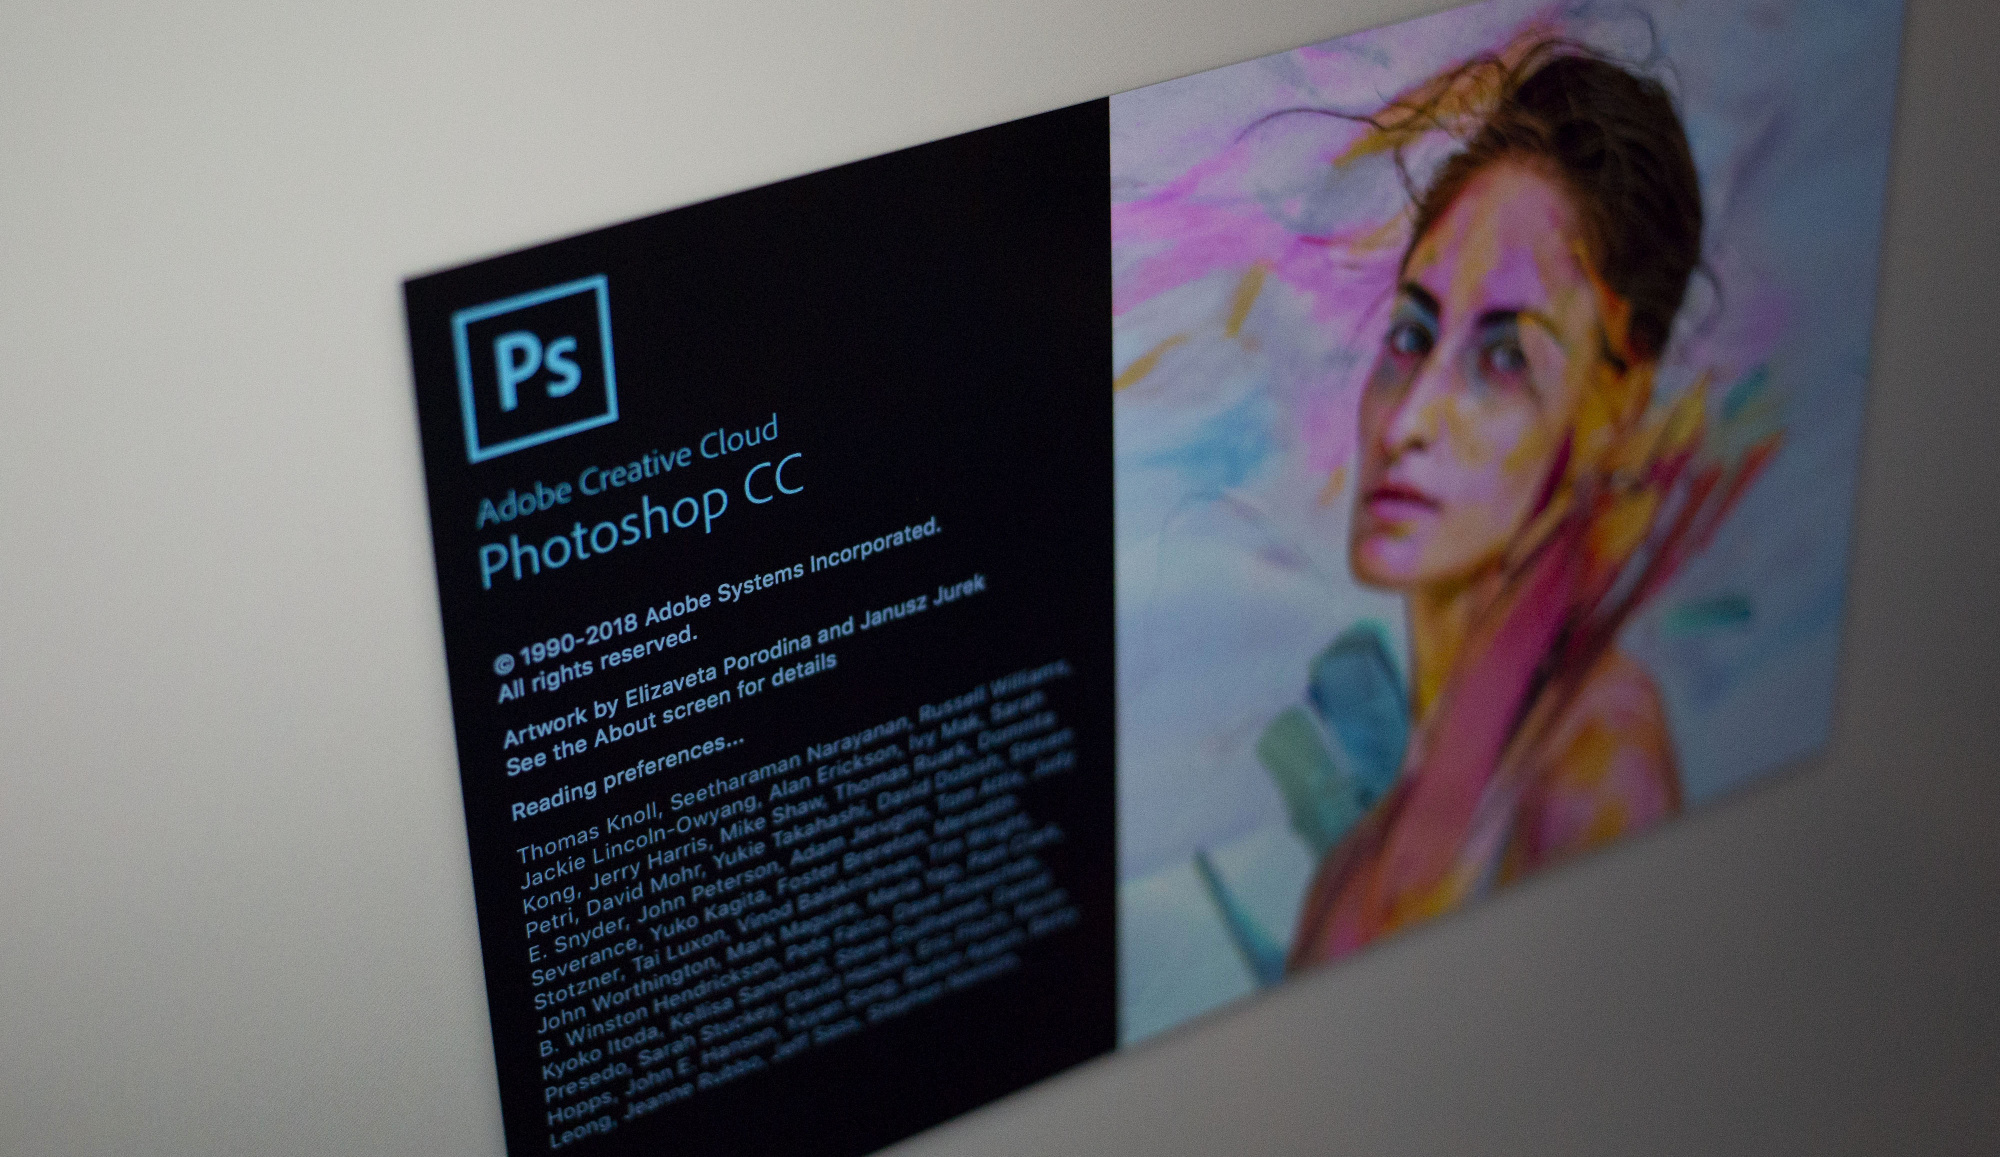 The Adobe Systems Inc. Photoshop CC software start-up screen is displayed on a computer monitor.